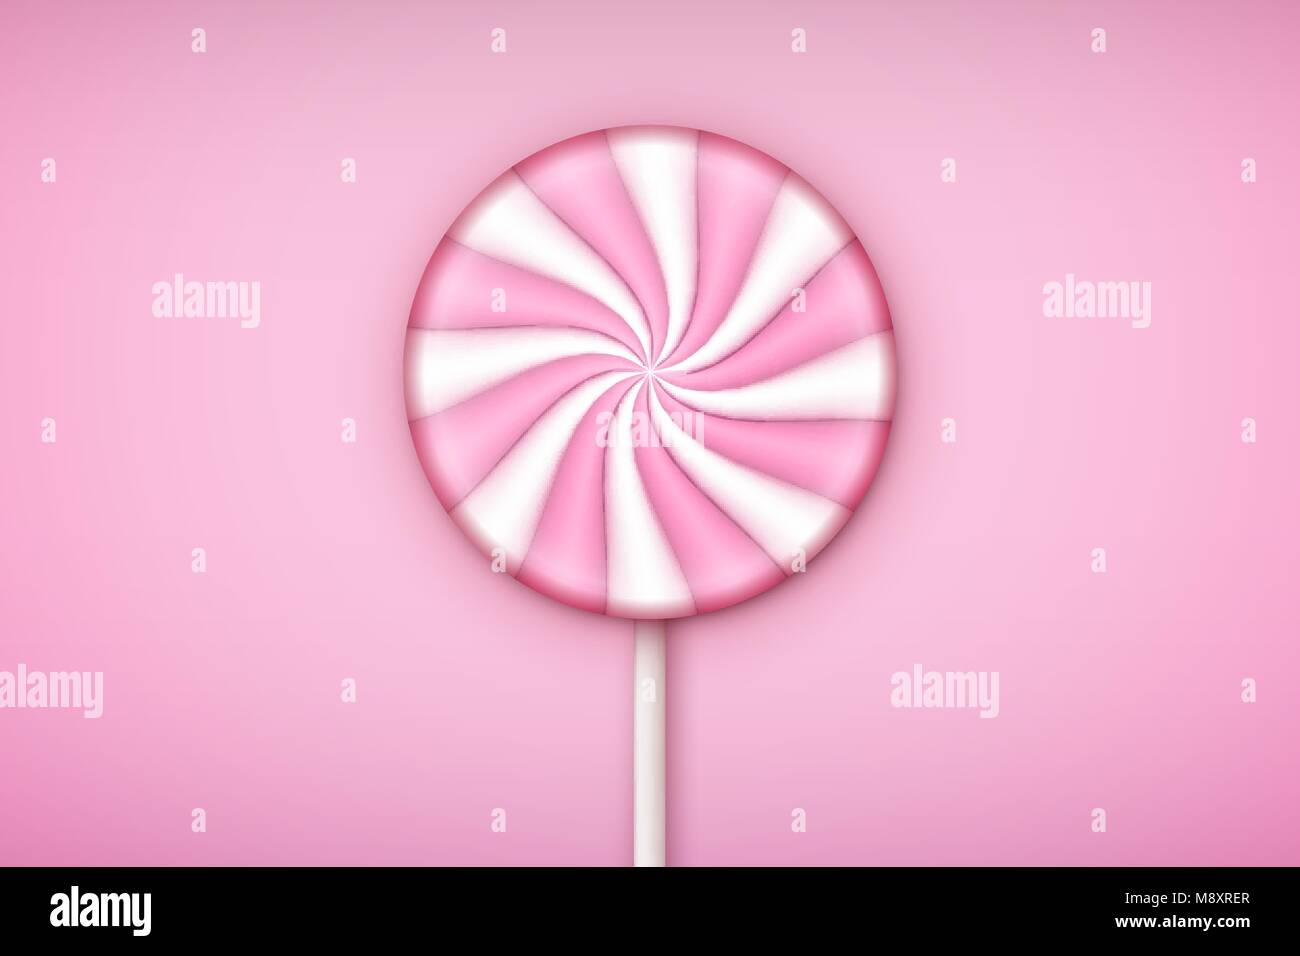 Pink Lolipop candy on pastel pink background. Stock Vector